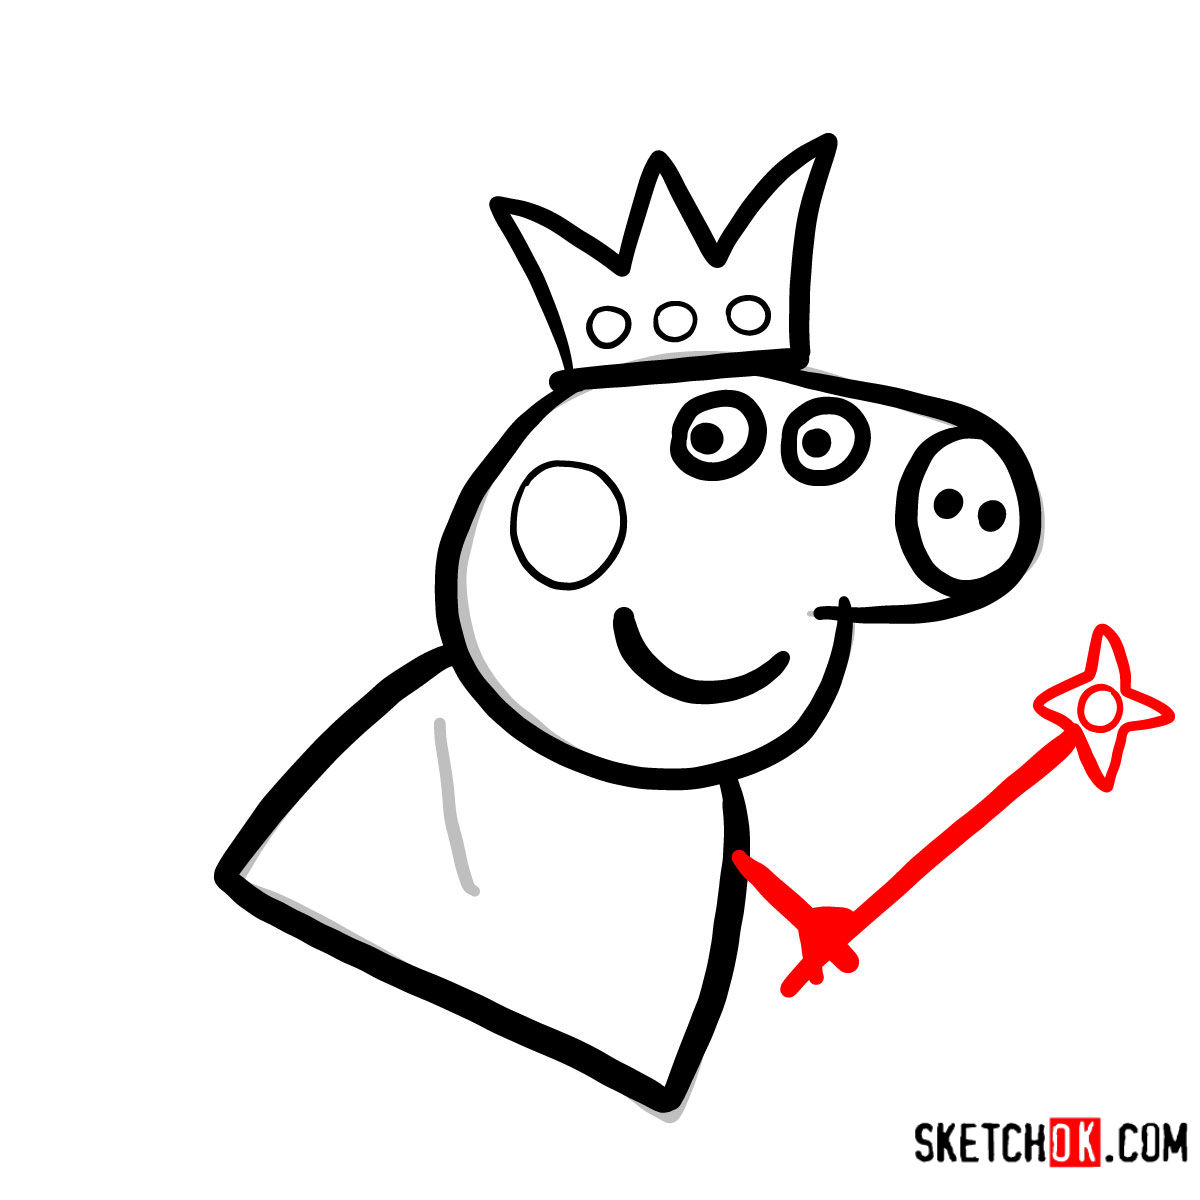 How to draw Peppa Pig dressed as fairy - Sketchok easy drawing guides